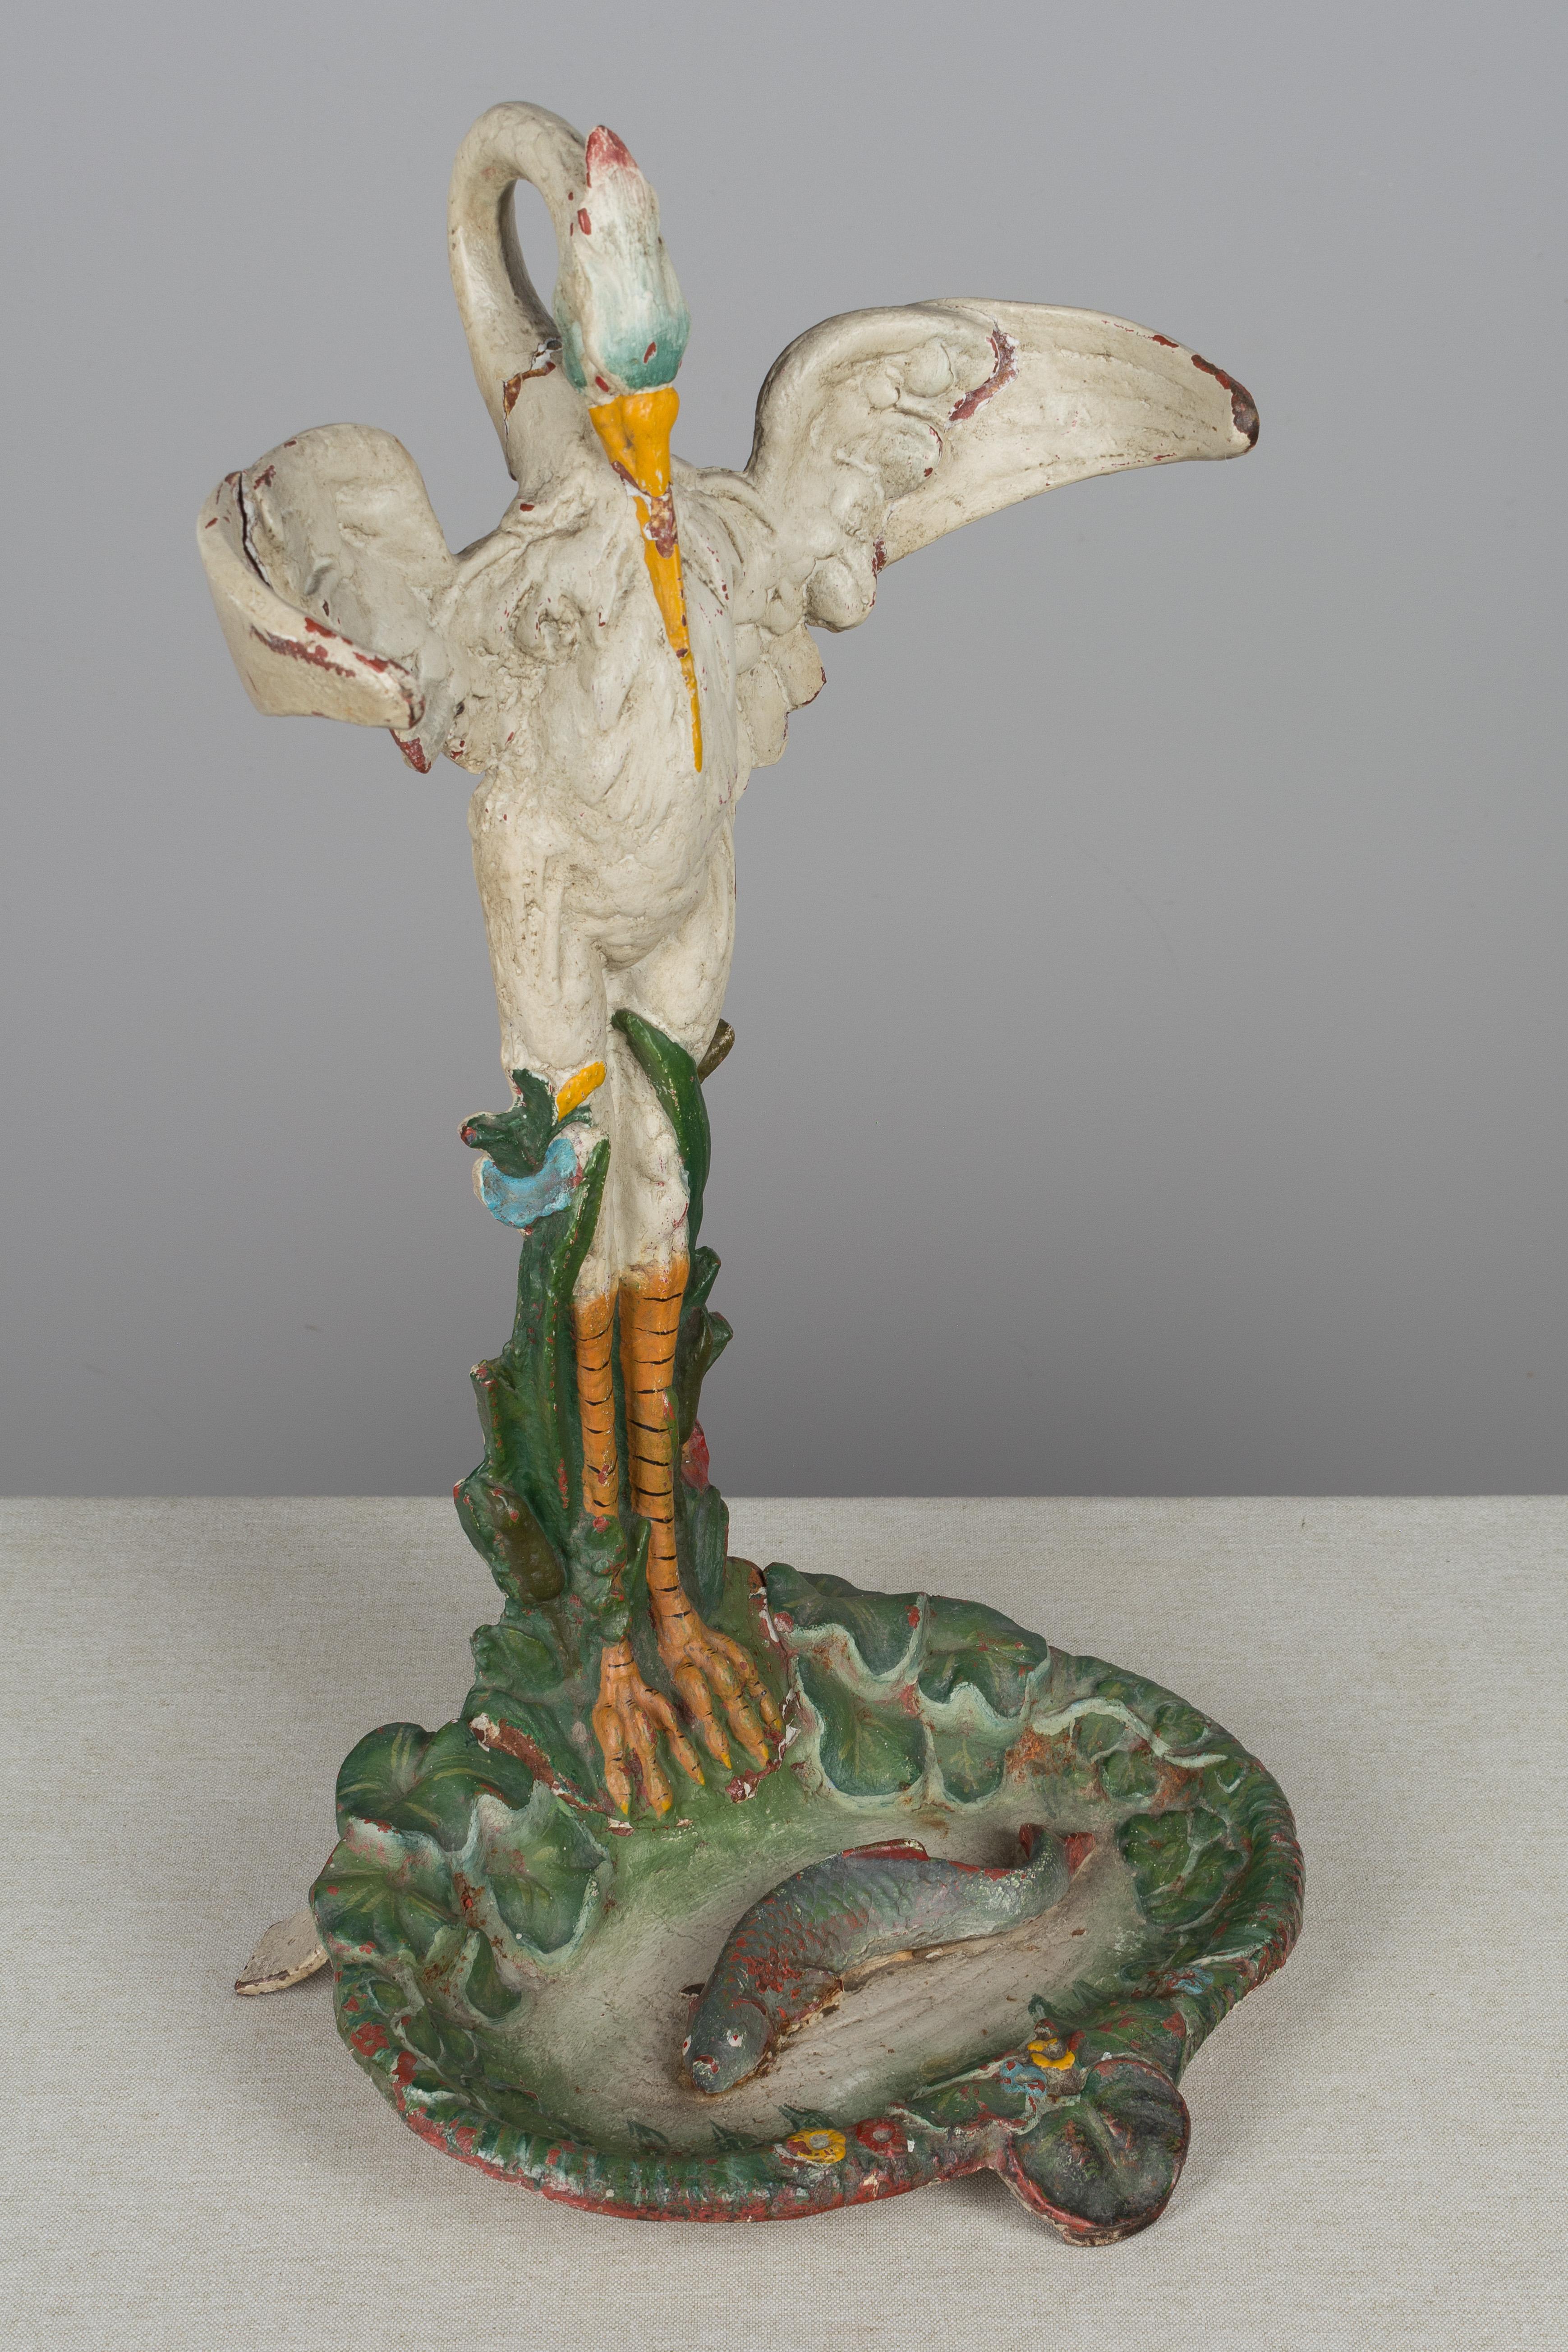 A whimsical 19th century French cast iron polychrome painted umbrella stand. Beautifully detailed sculpture of a crane standing at the water's edge, eyeing a fish in the pond below. The bird's outstretched wings curve to hold the umbrellas upright